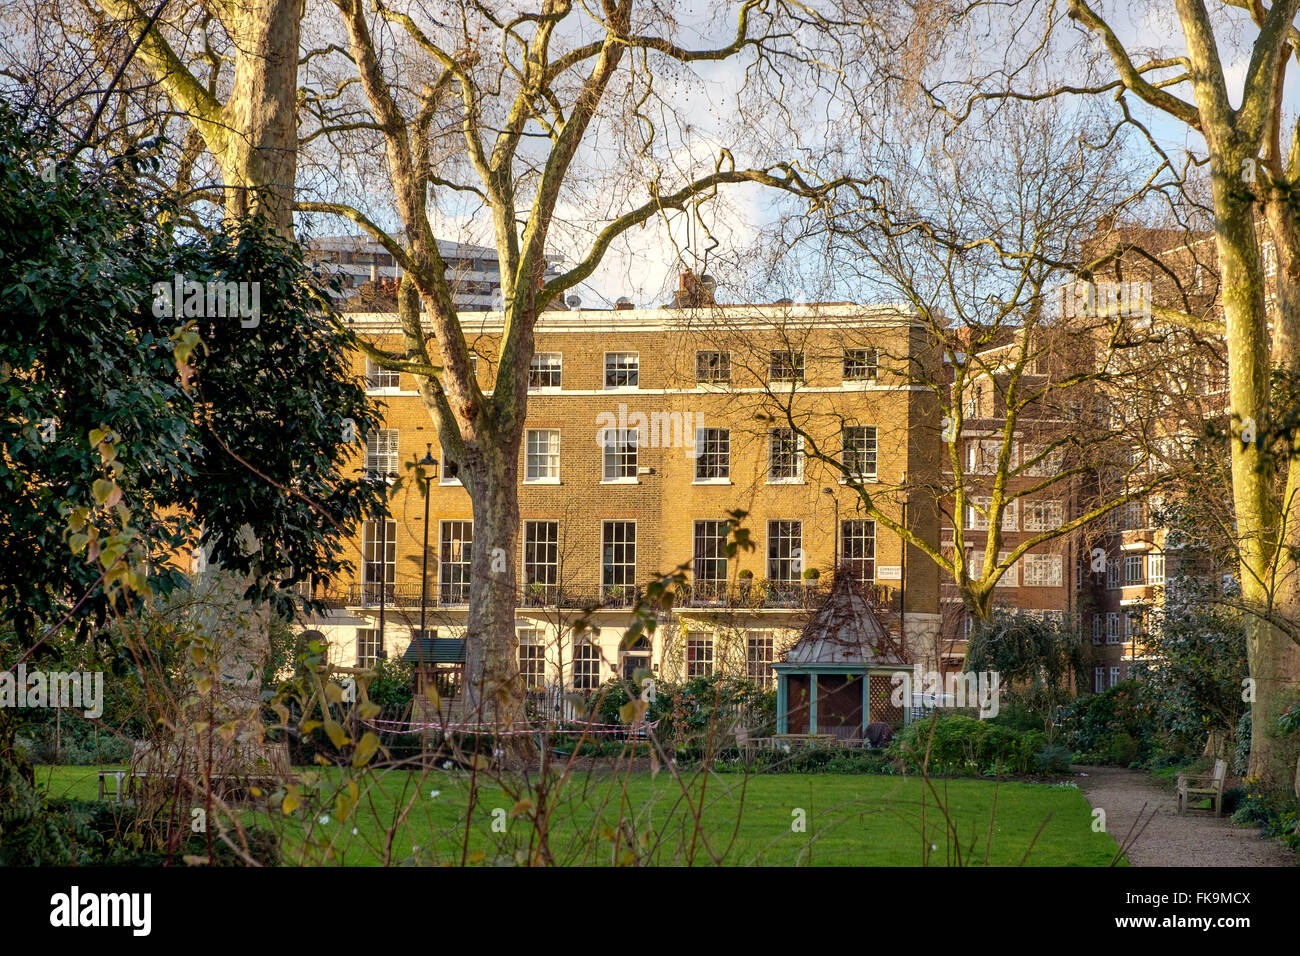 London, UK - 24 February 2016: Connaught Square viewed across the private gardens Stock Photo